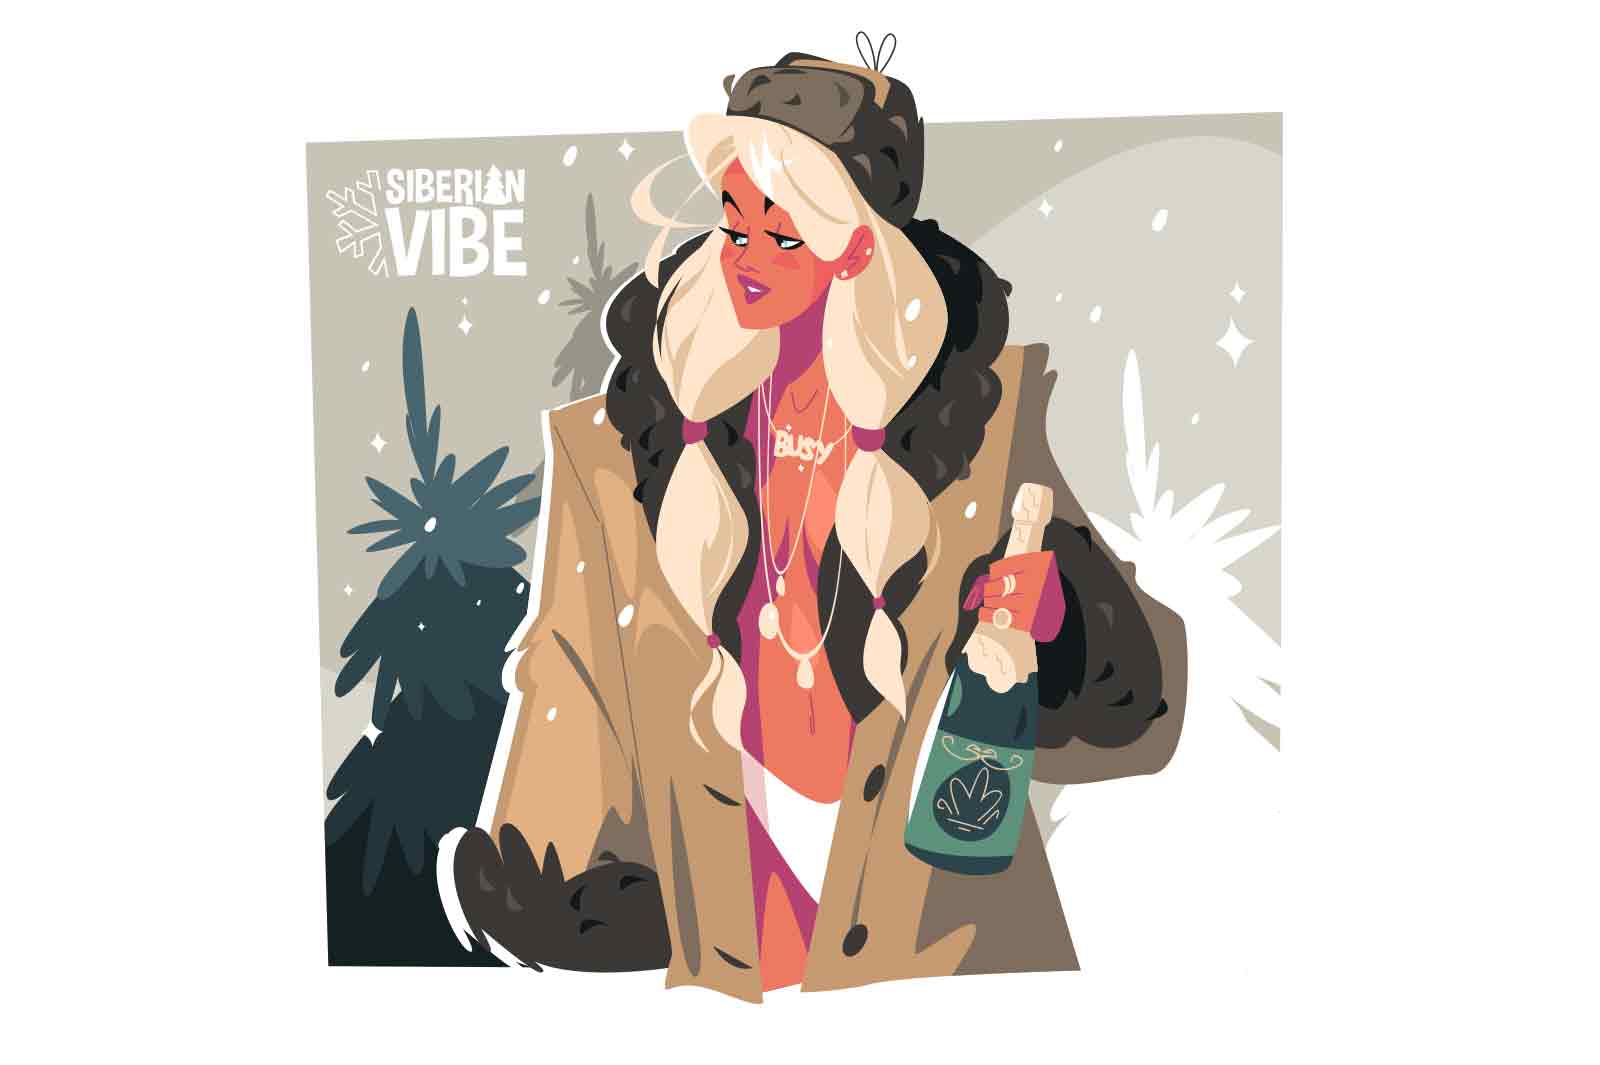 Girl in swimsuit and fur coat holding bottle of wine vector illustration. Winter and siberian vibe concept